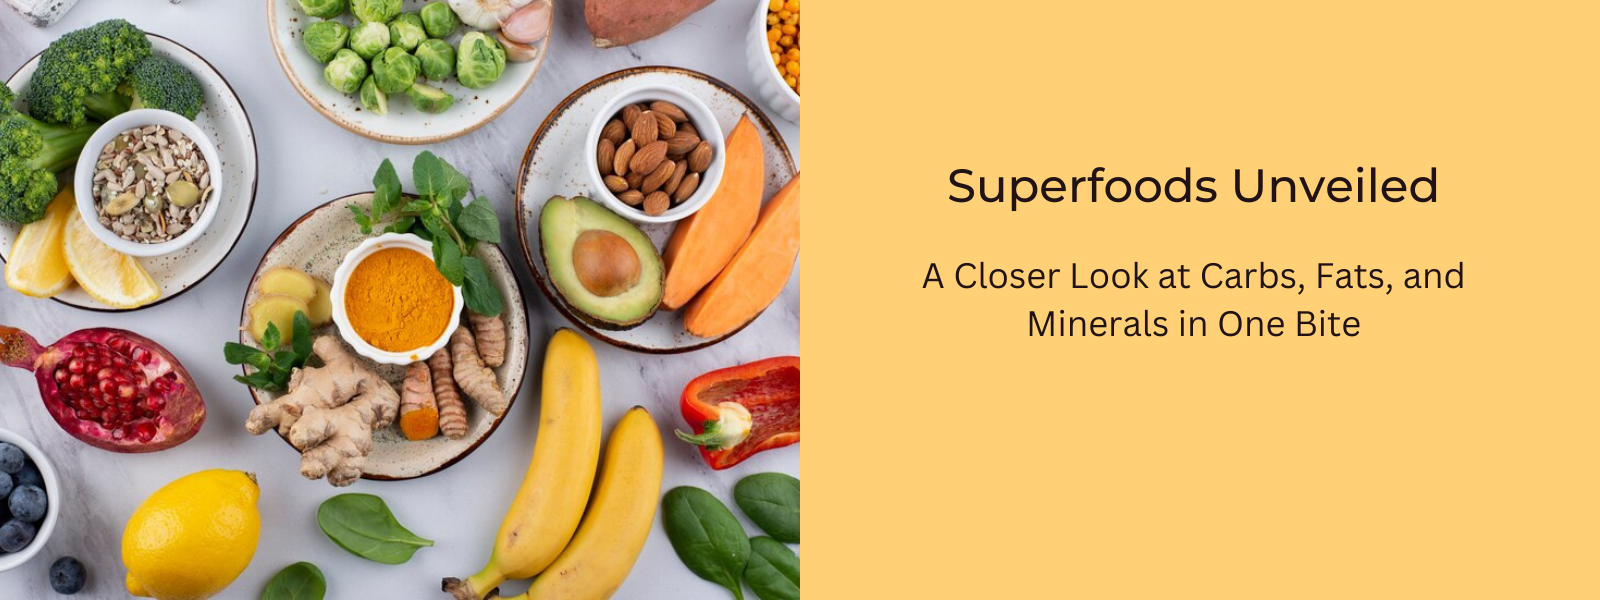 Superfoods Unveiled: A Closer Look at Carbs, Fats, and Minerals in One Bite